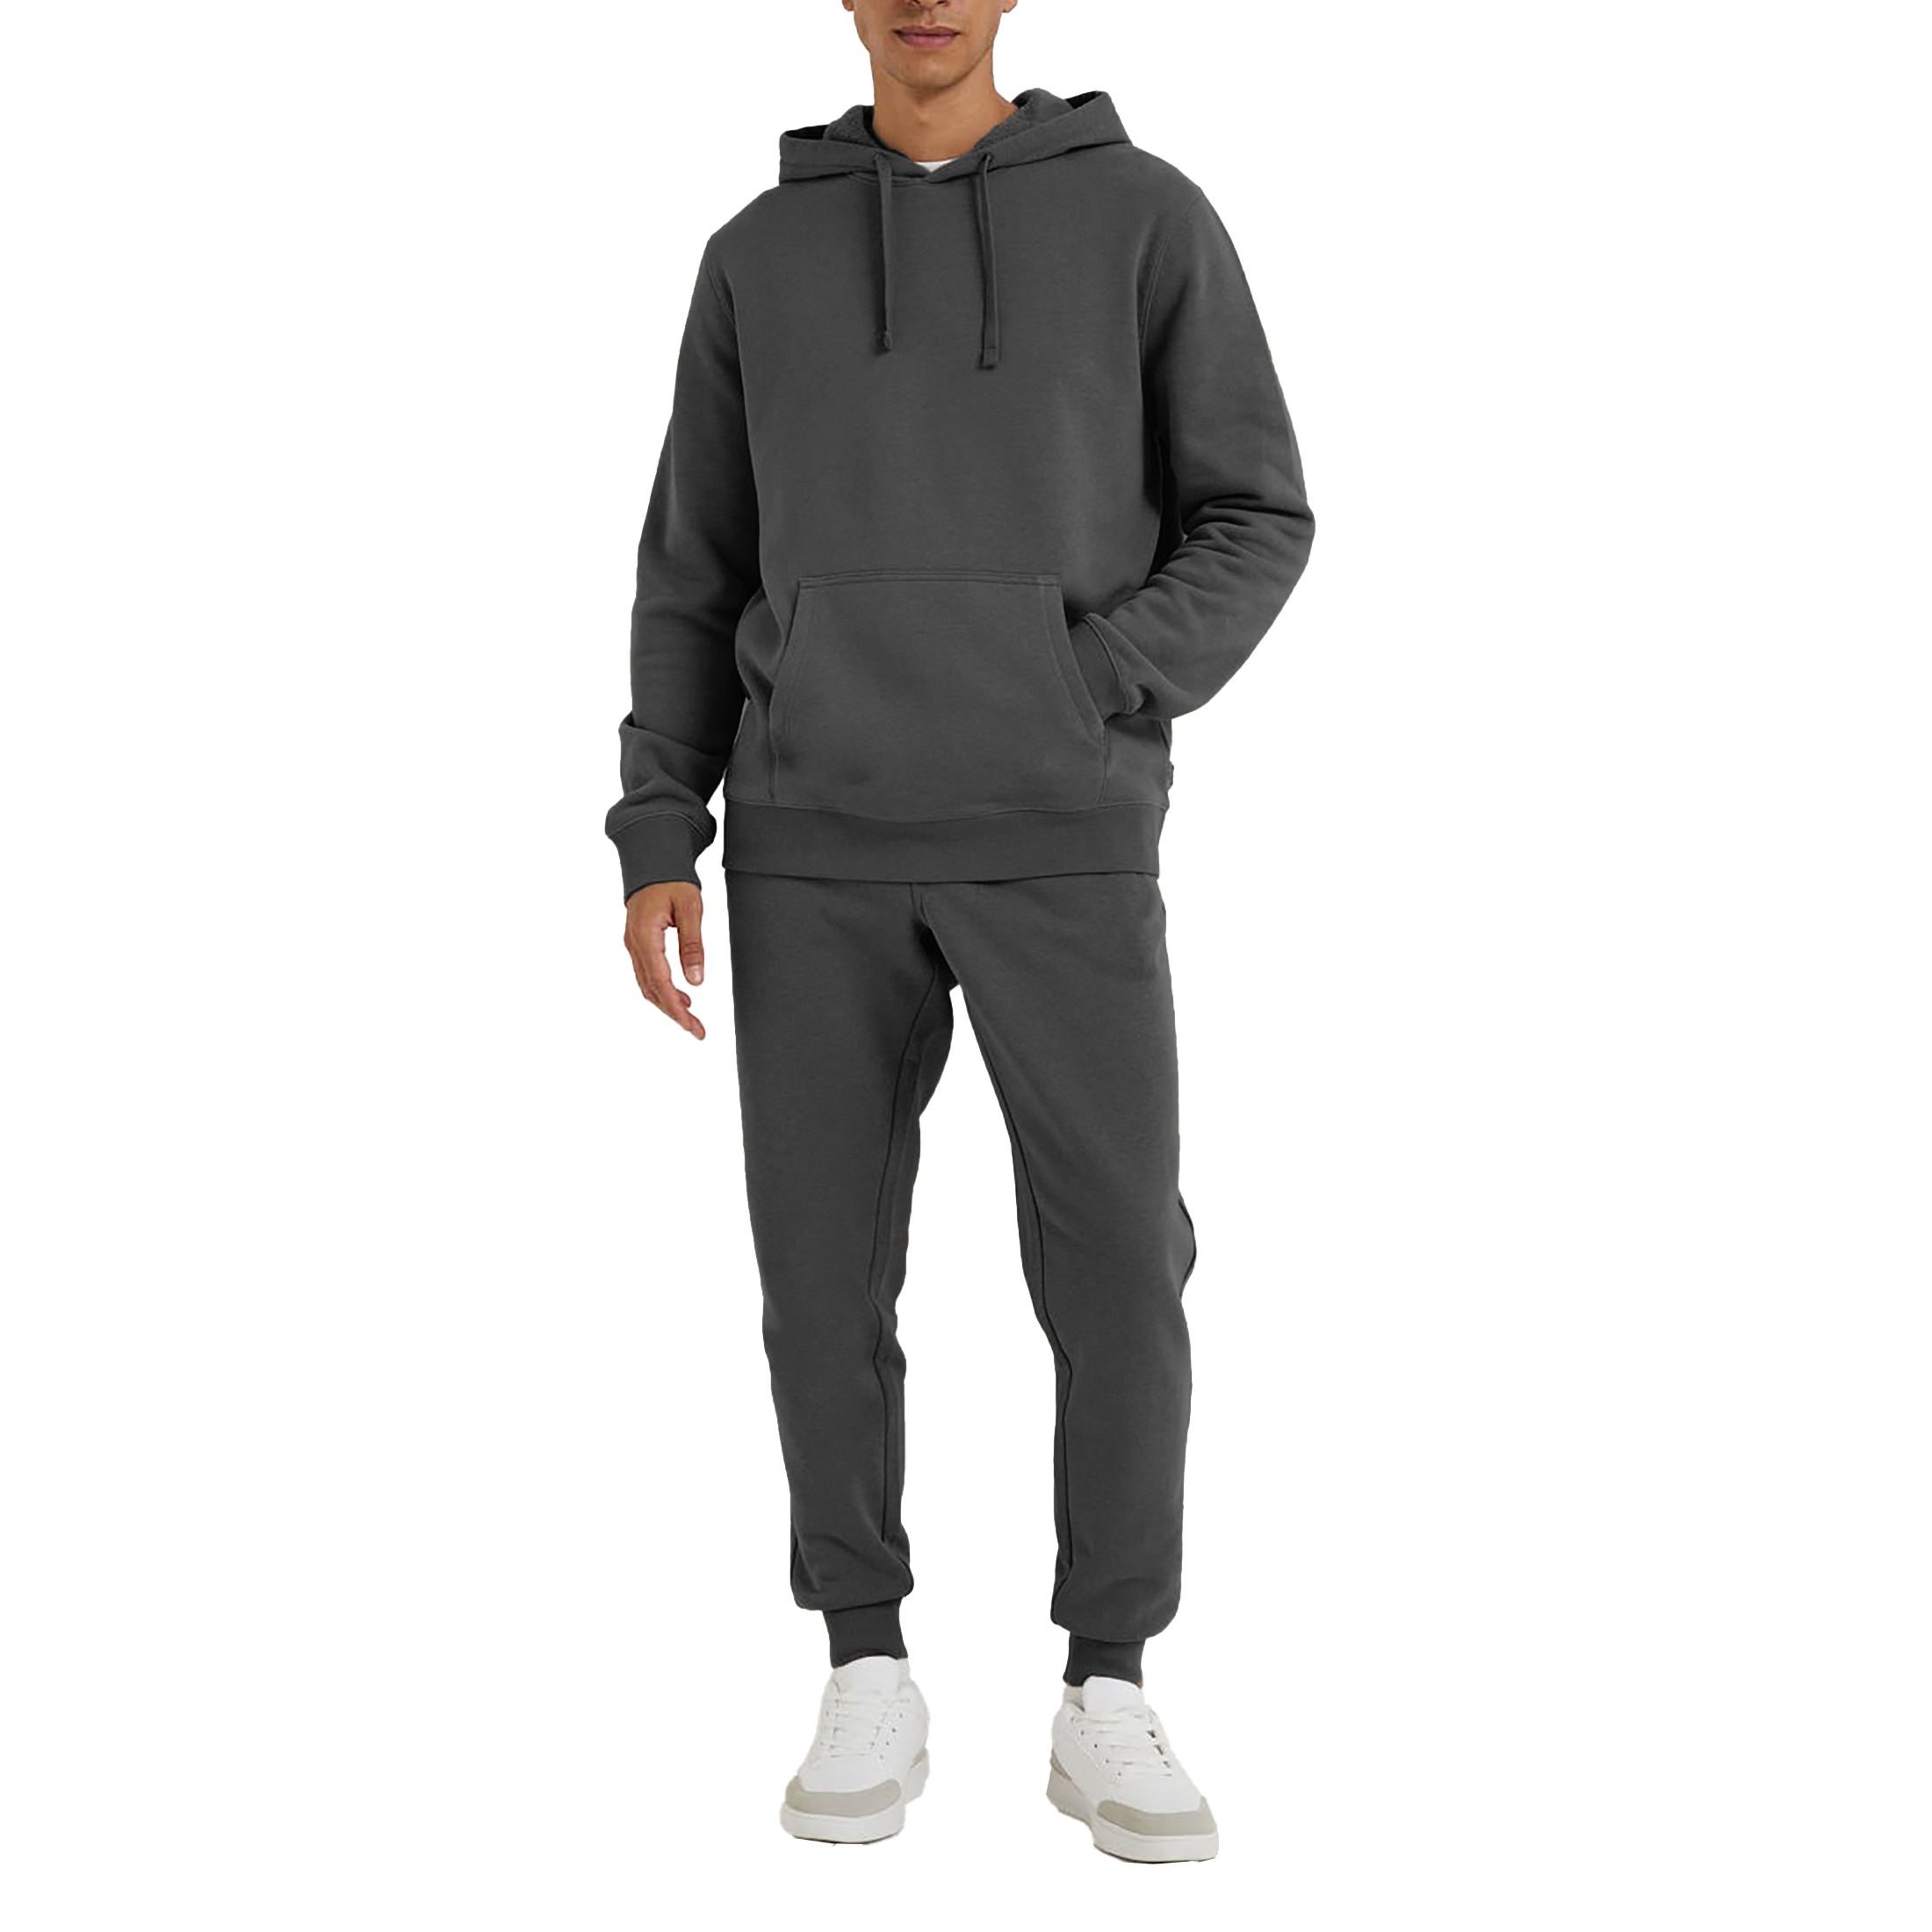 Men's Athletic Warm Jogging Pullover Active Tracksuit - Charcoal, 2X-Large